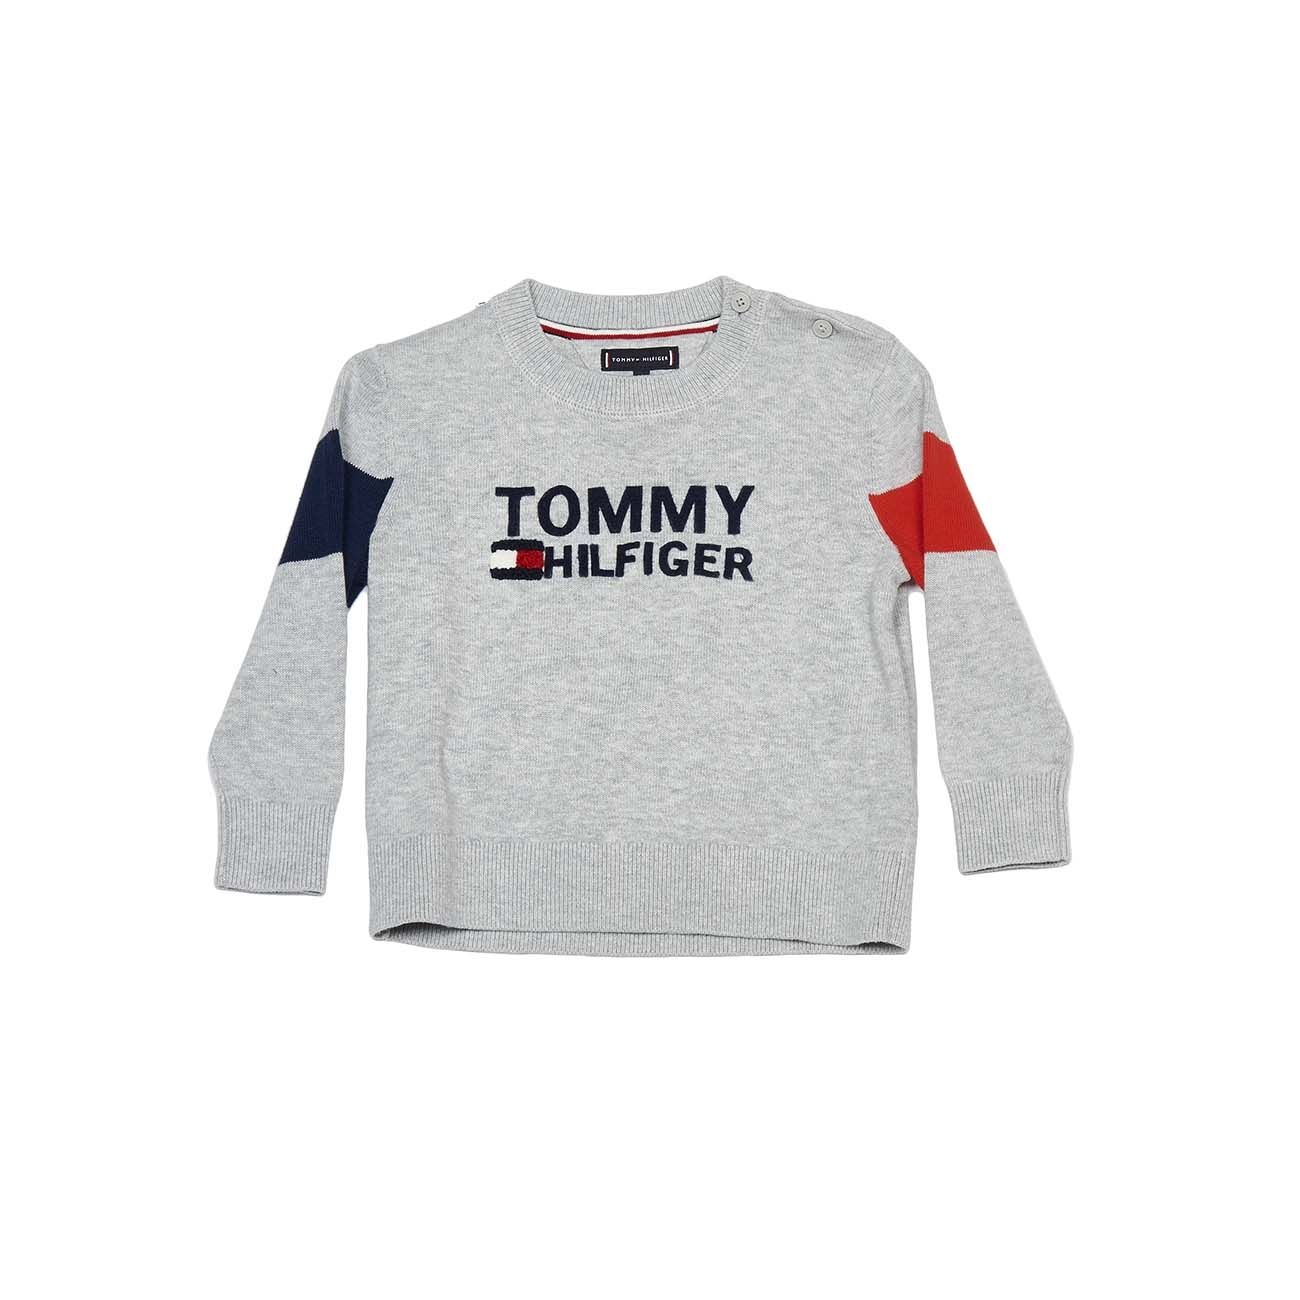 tommy hilfiger blue red and white jumper